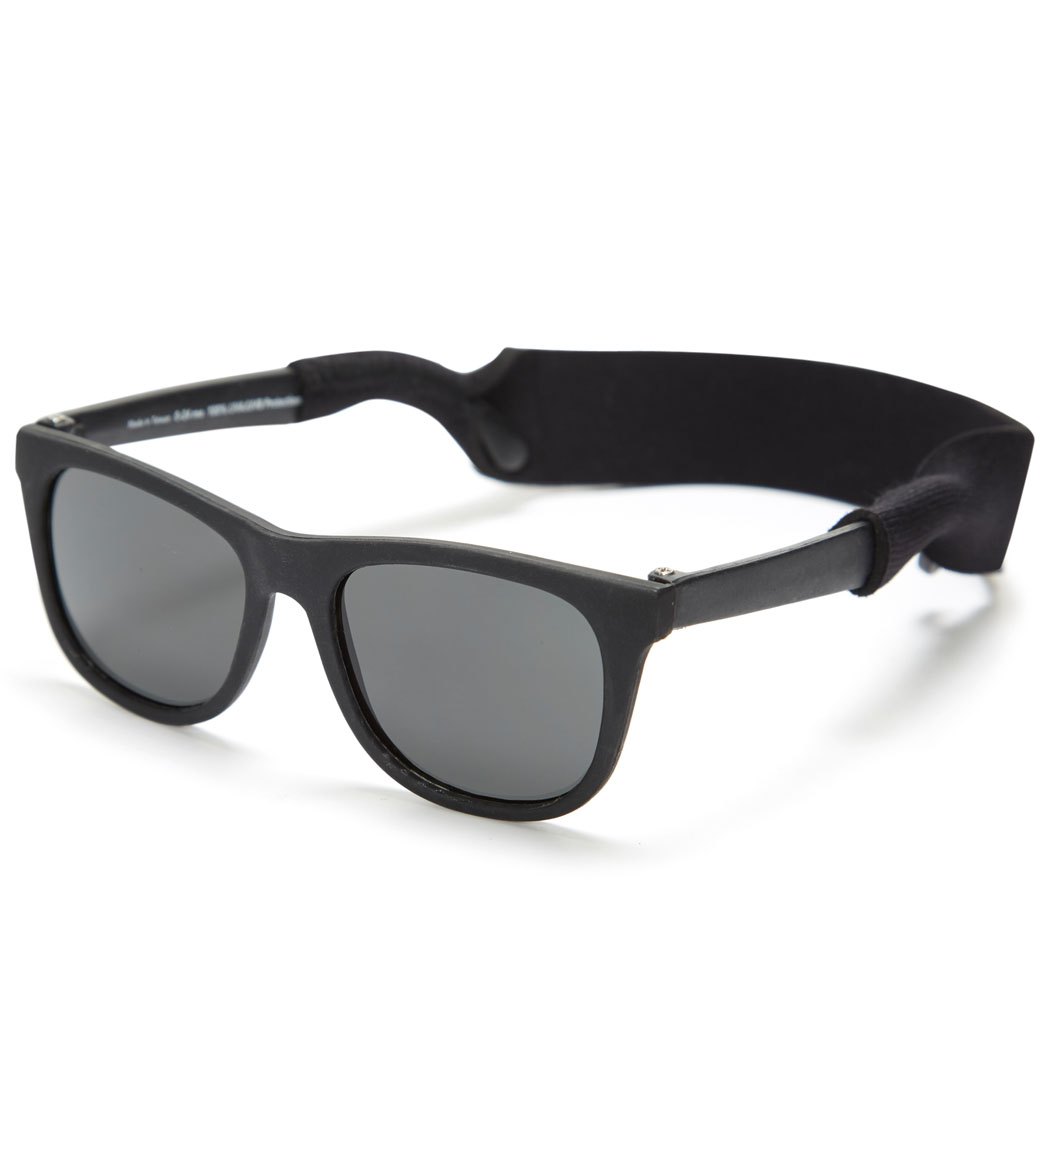 I Play. By Green Sprouts Flexible Sunglasses Baby - Black 0-24 Months 100% Rubber - Swimoutlet.com